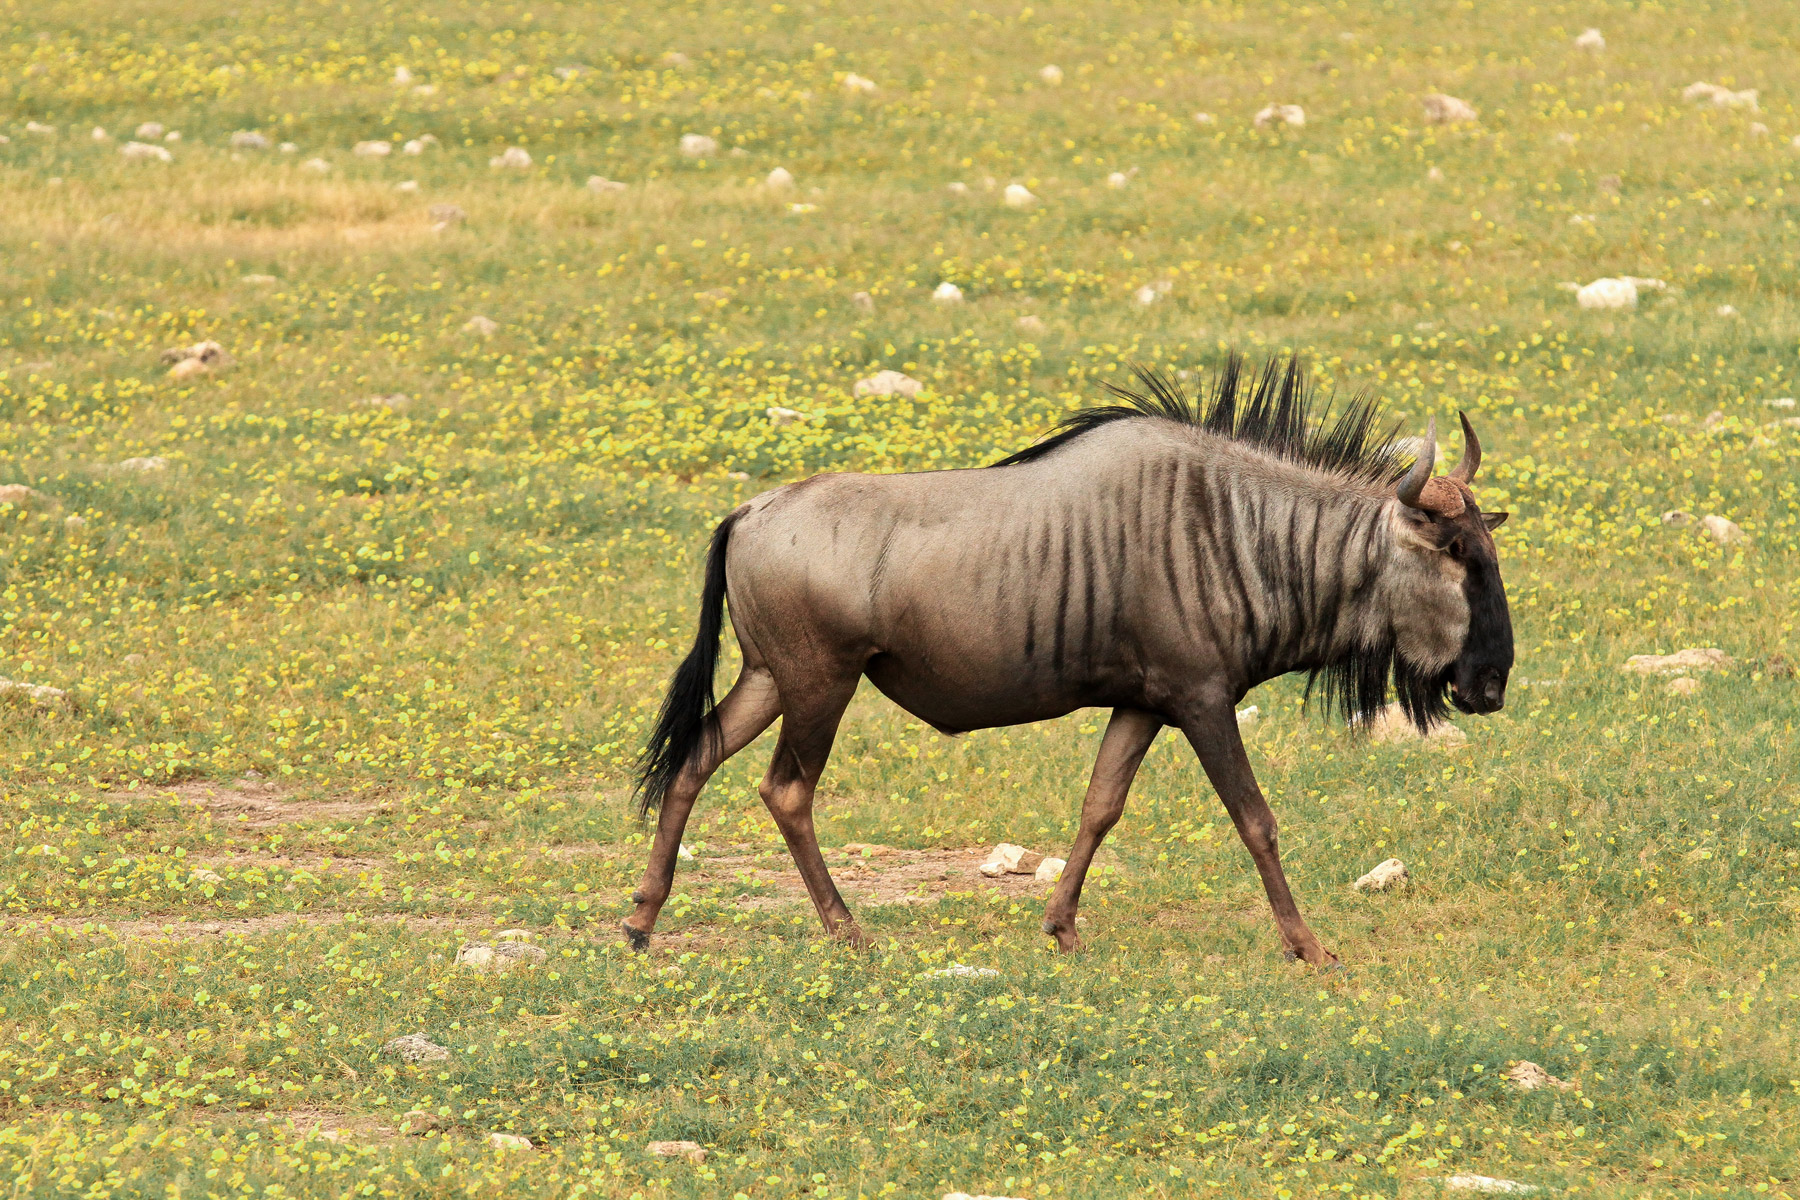 A wildebeest in the Chobe National Park in Botswana